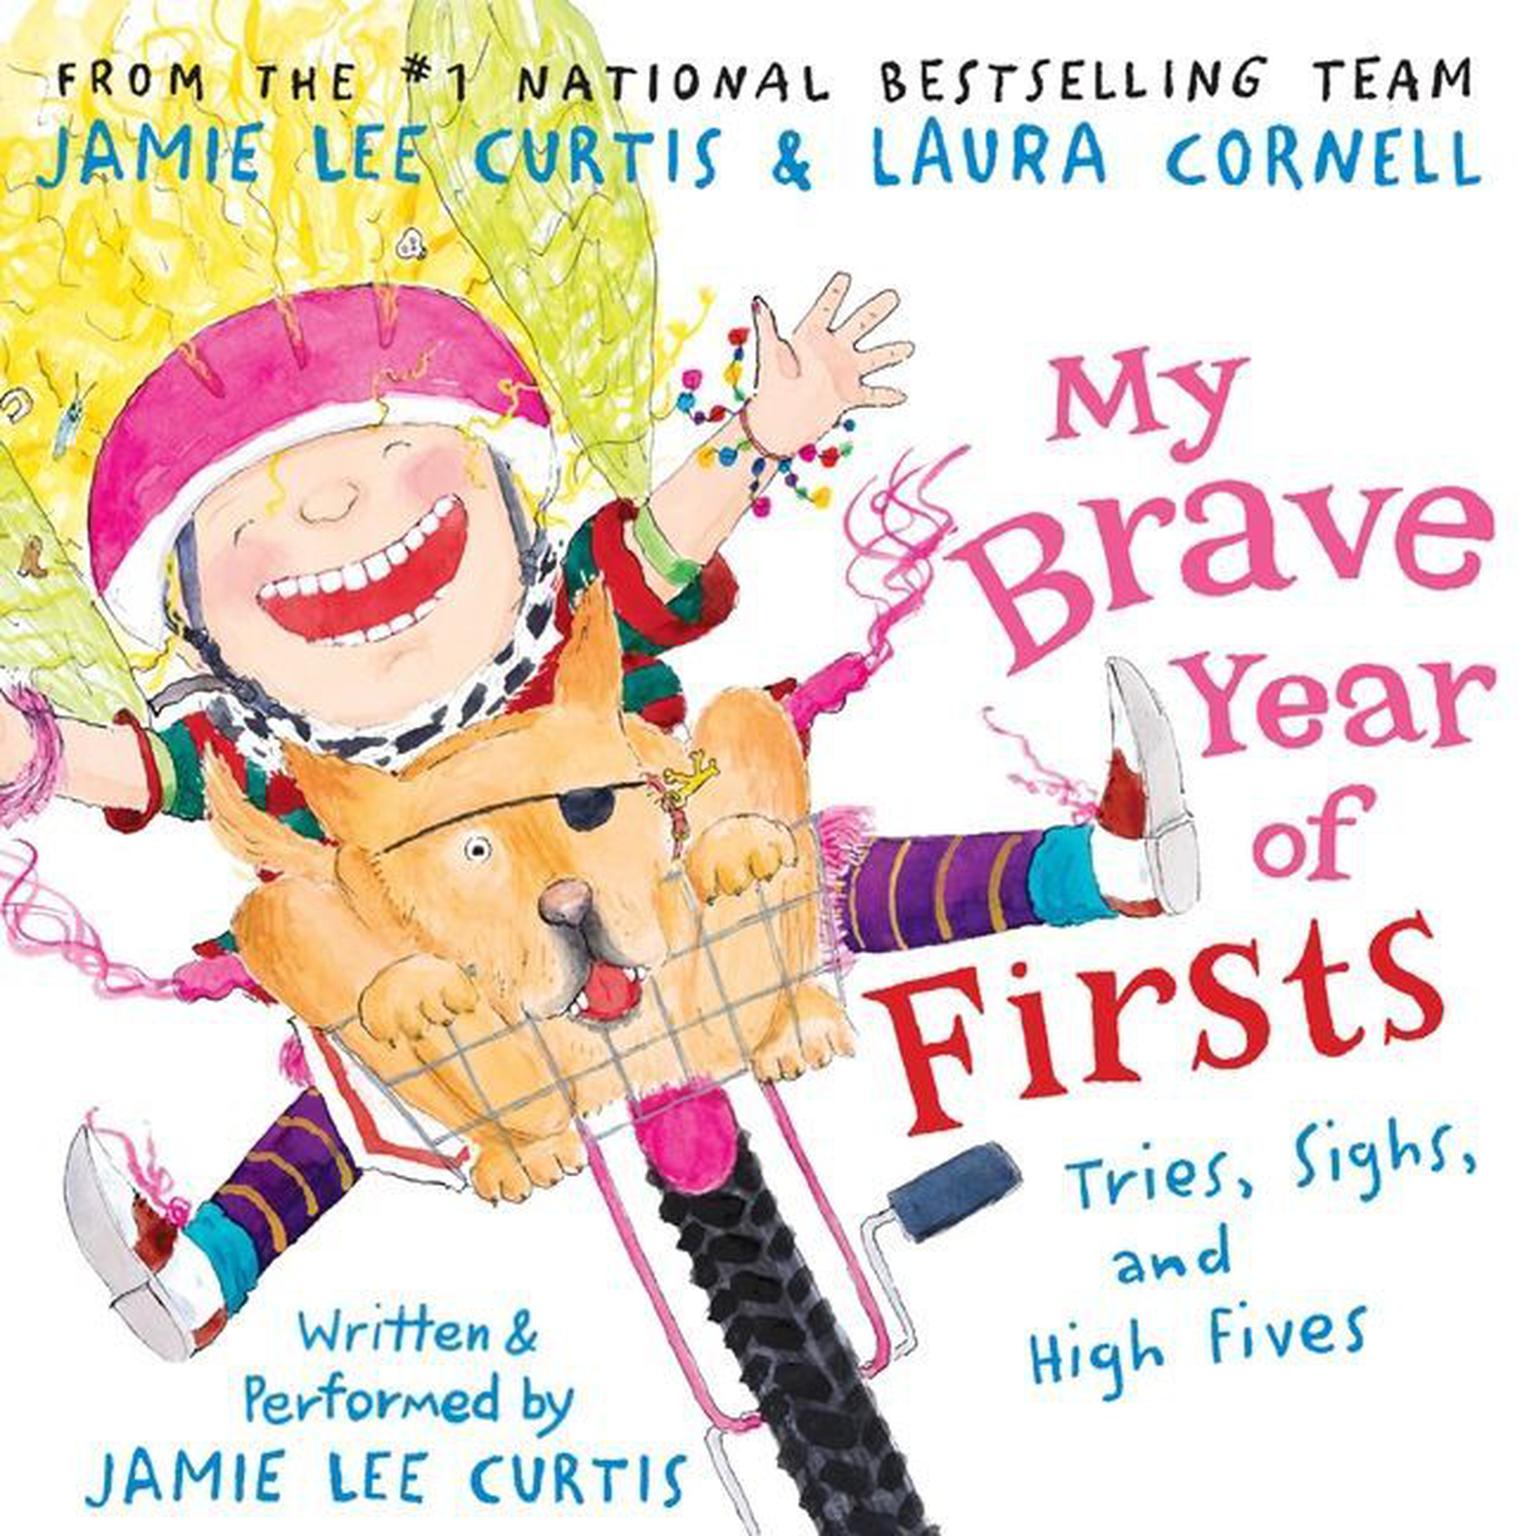 My Brave Year of Firsts: Tries, Sighs, and High Fives Audiobook, by Jamie Lee Curtis